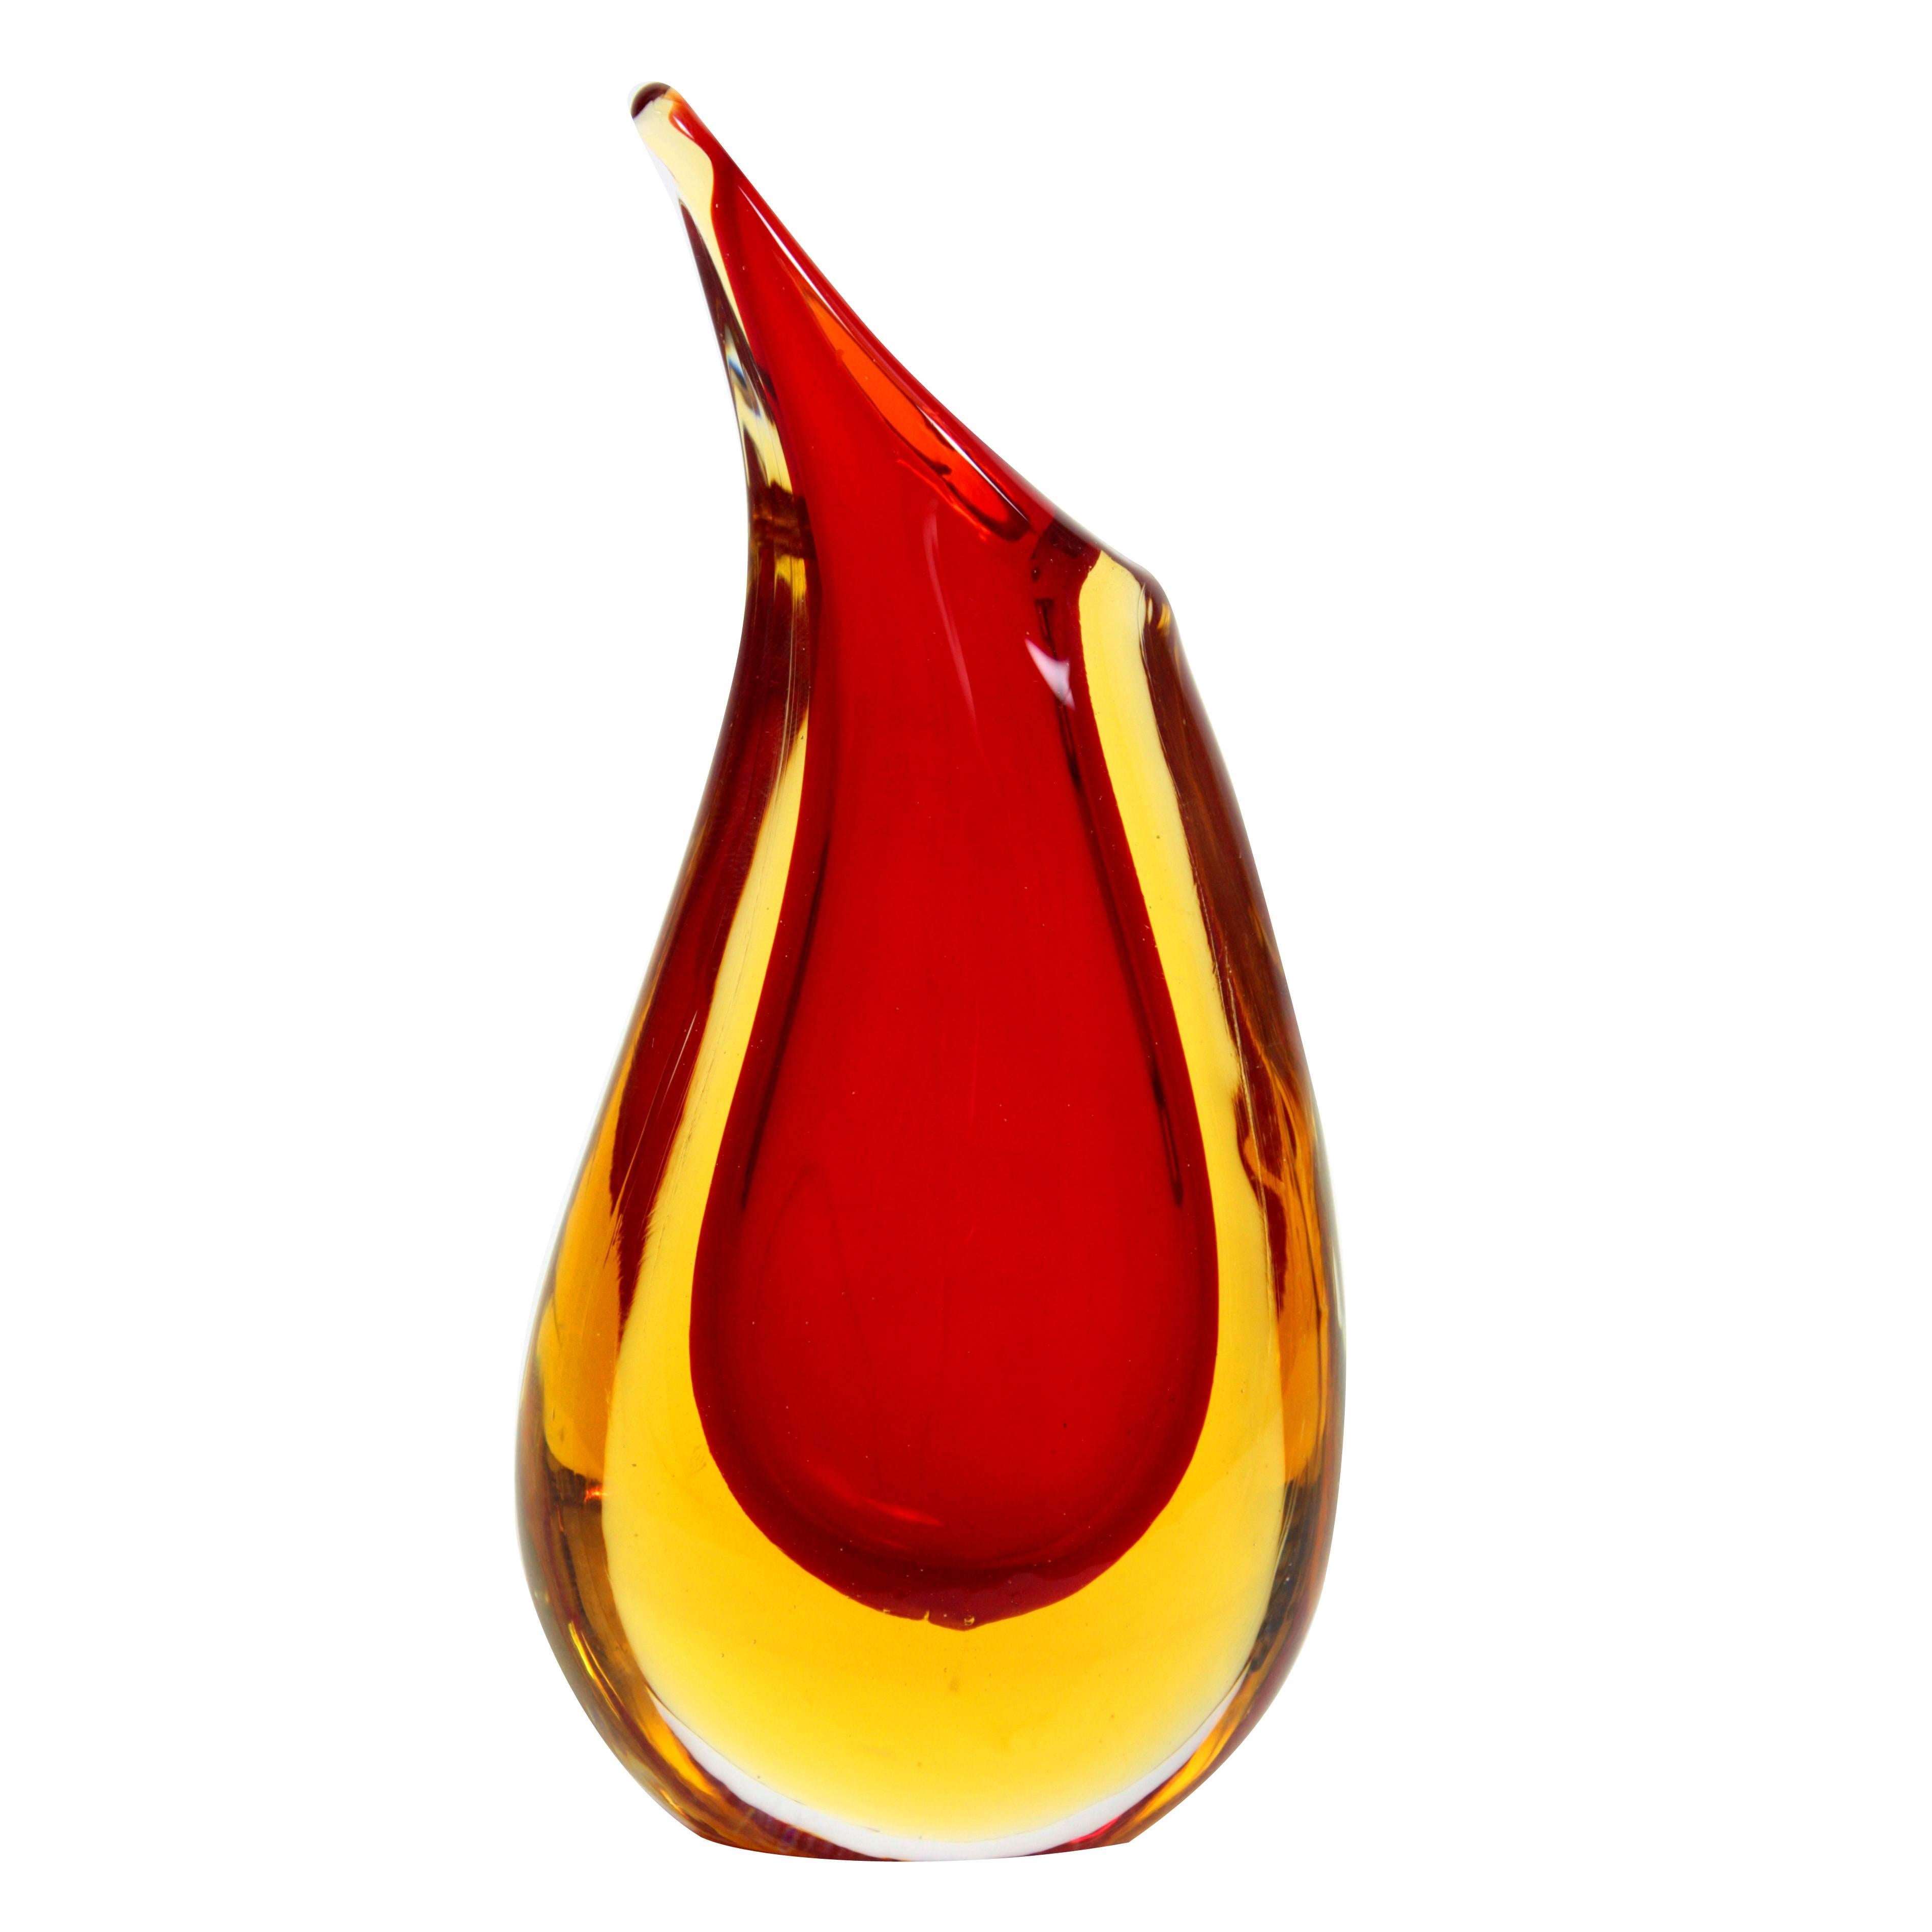 Murano Glass Flavio Poli  Red and Yellow Sommerso Teardrop Vase